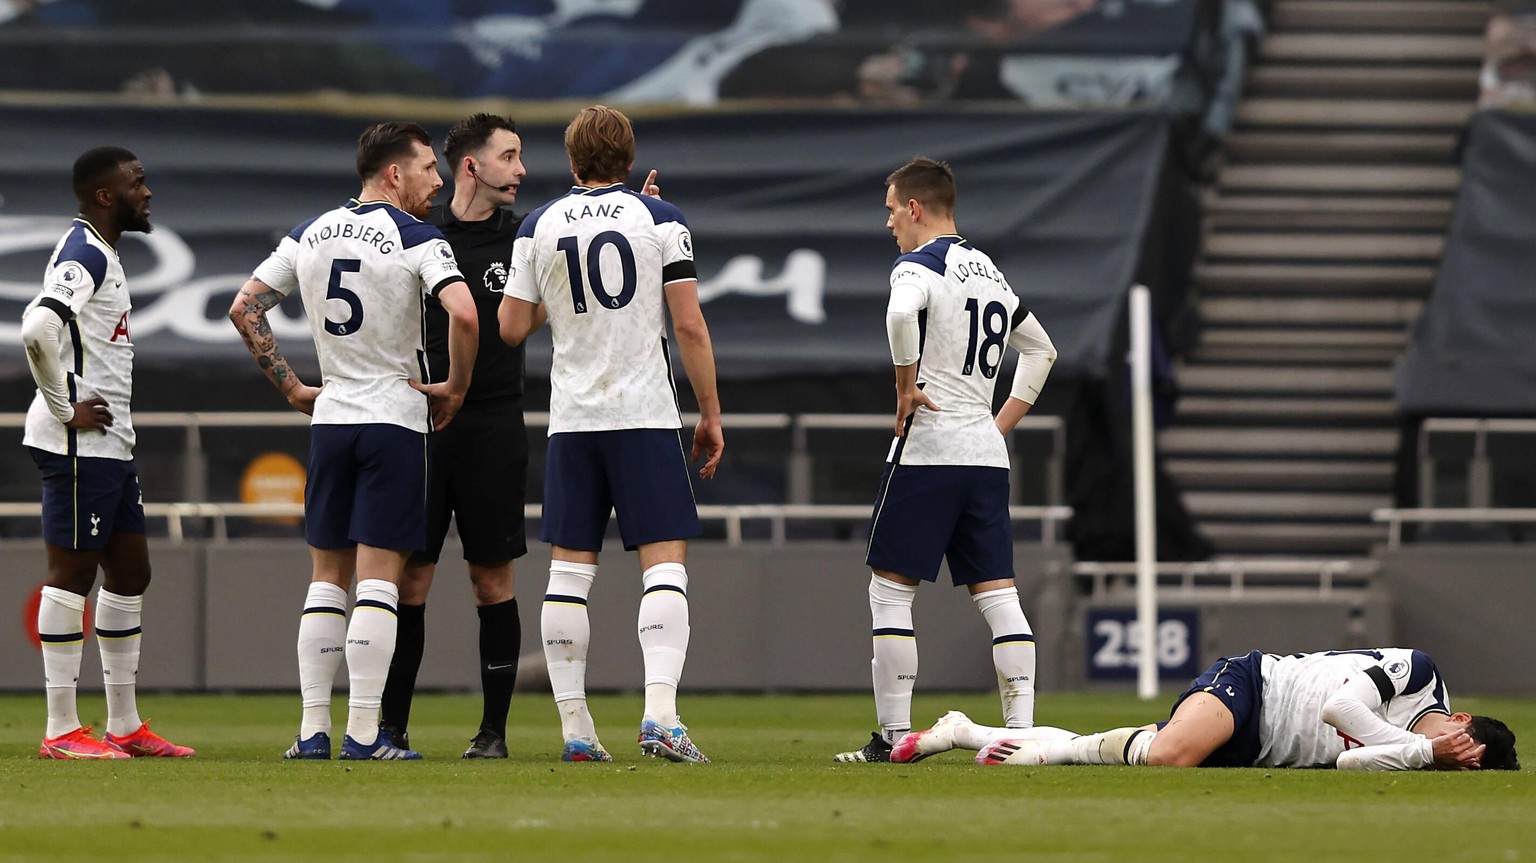 Tottenham Hotspur v Manchester United, ManU - Premier League - Tottenham Hotspur Stadium Tottenham Hotspur players confront referee Chris Kavanagh after a foul on Heung-min Son right during the Premie ...